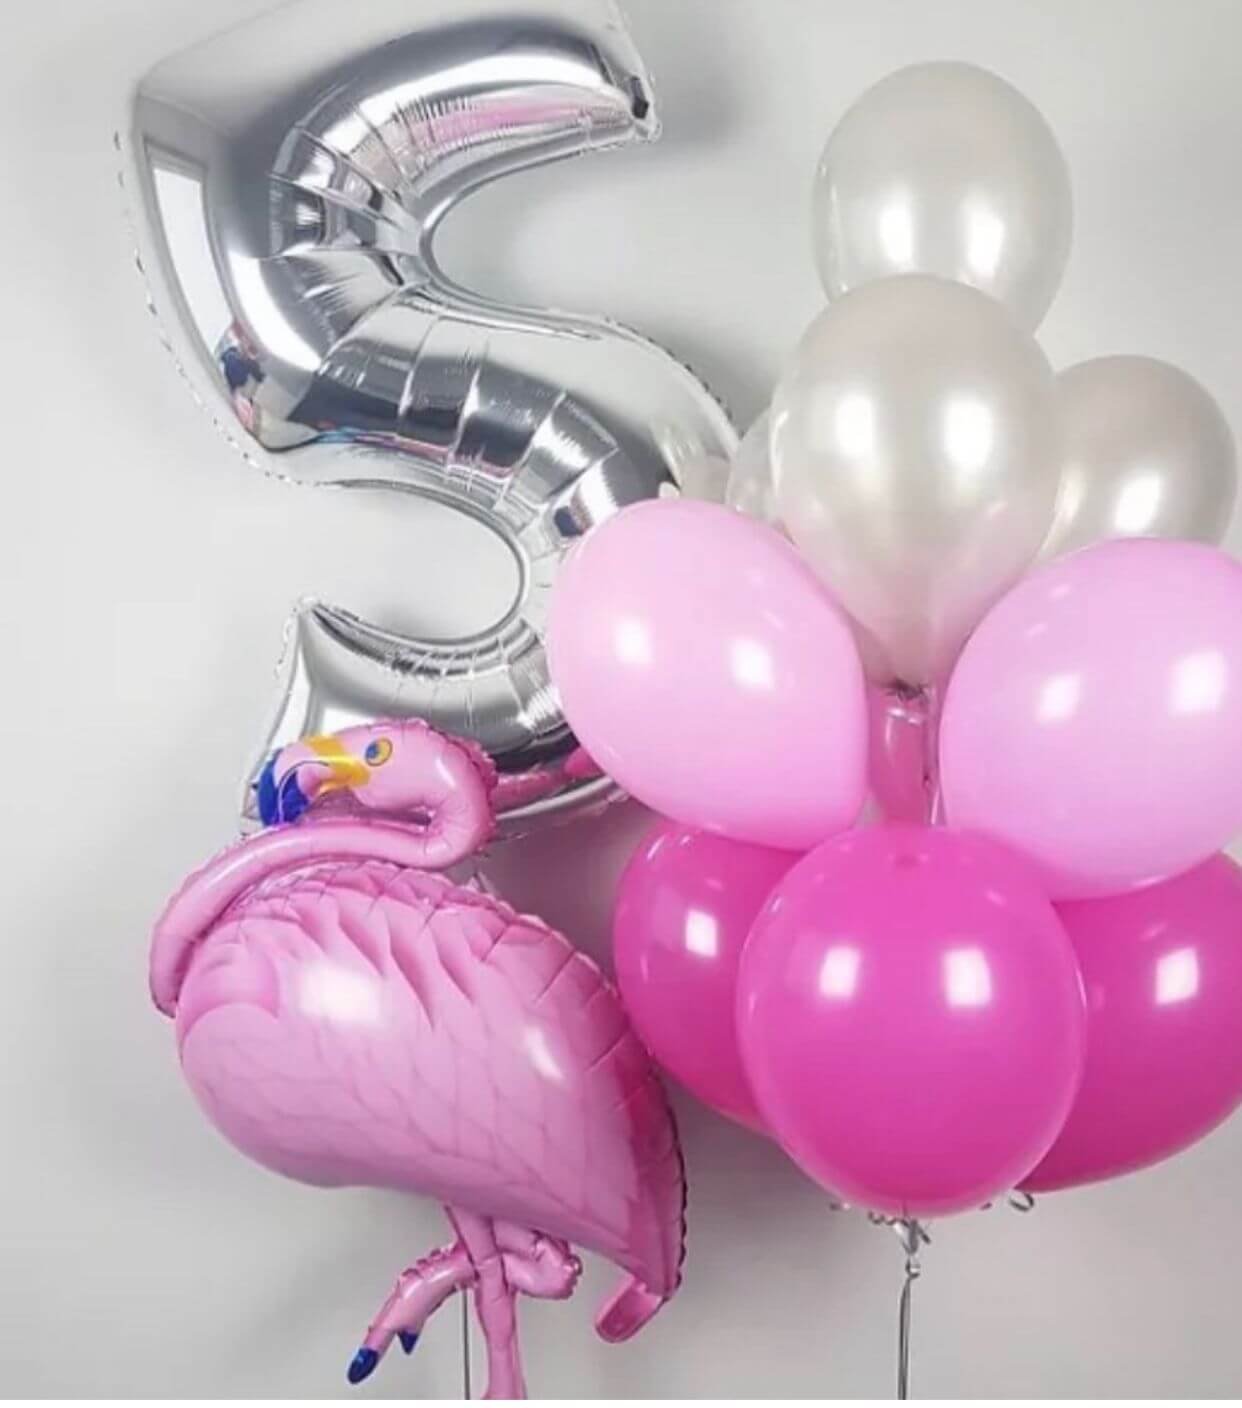 rose and white themed balloons with numbered foil balloons